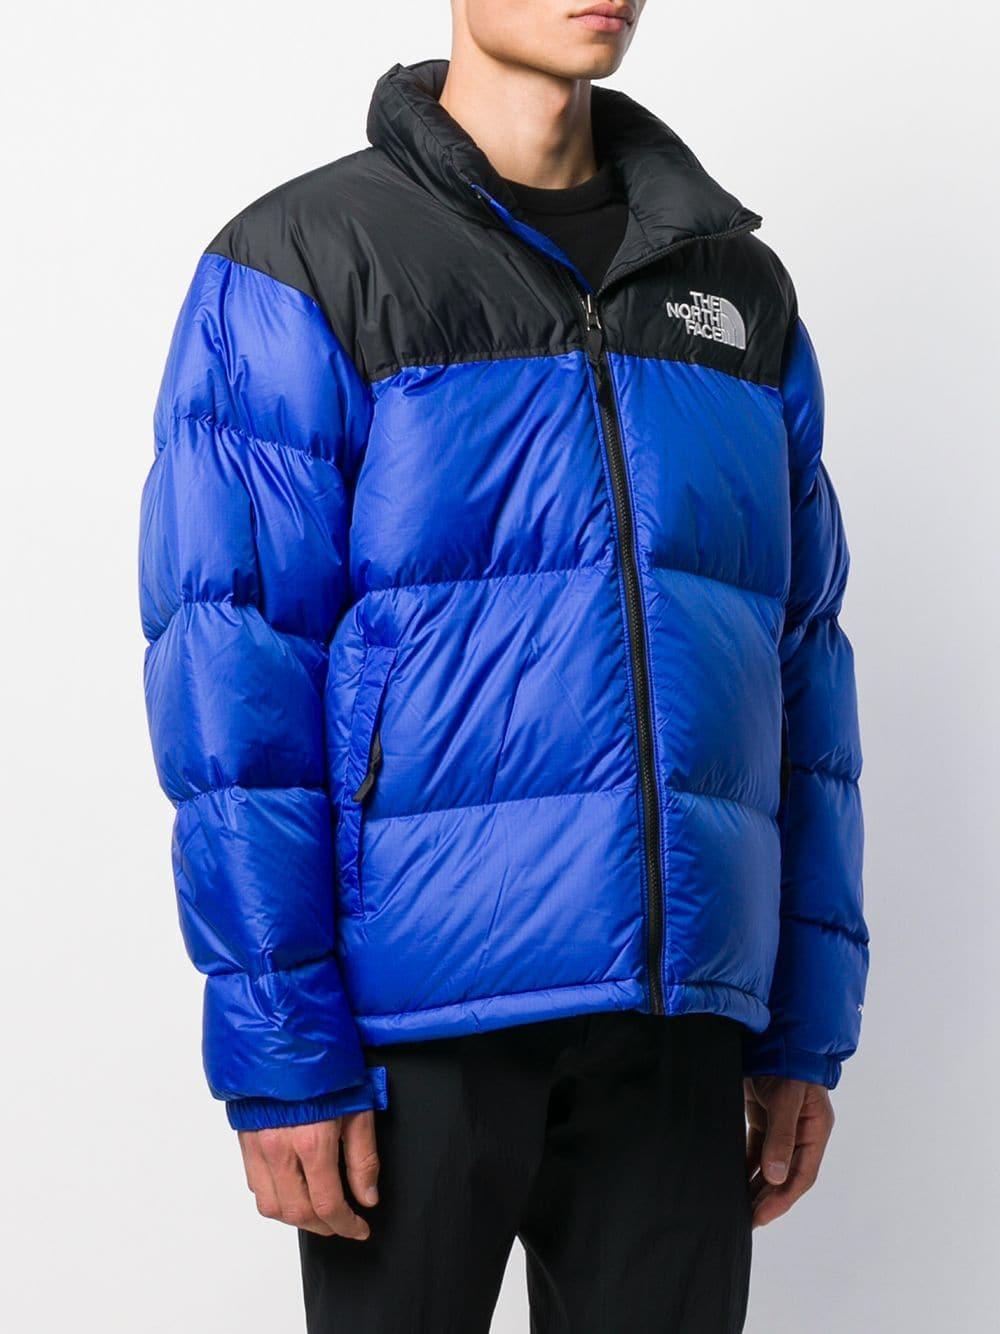 The North Face 1996 Retro Nuptse Down Jacket in Blue for Men - Lyst